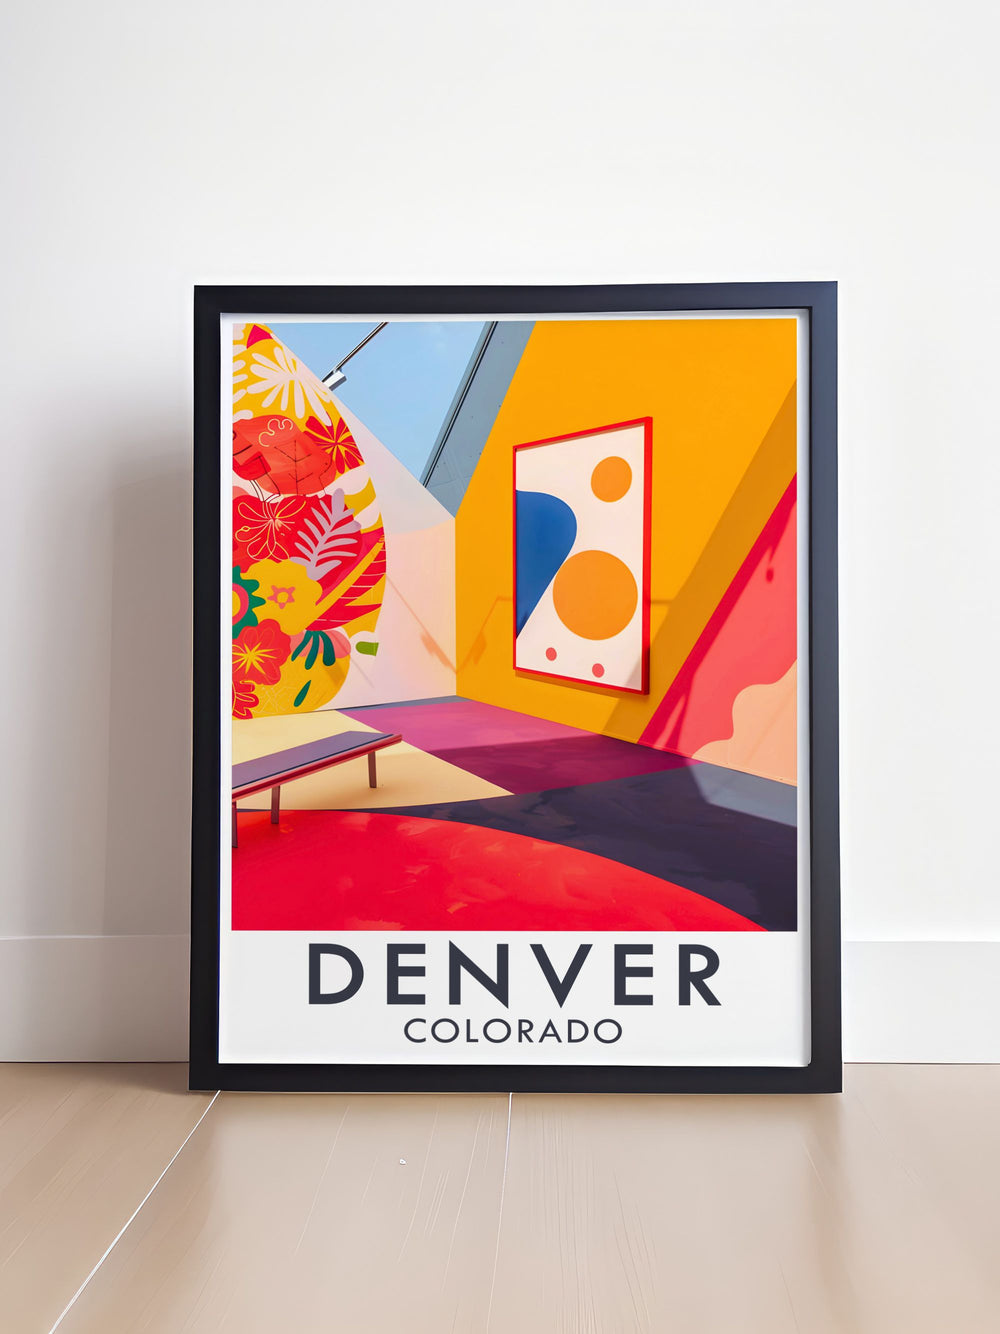 Boulder Colorado is beautifully depicted in this poster, showcasing its vibrant arts scene and stunning natural surroundings, making it a great addition to any art collection.